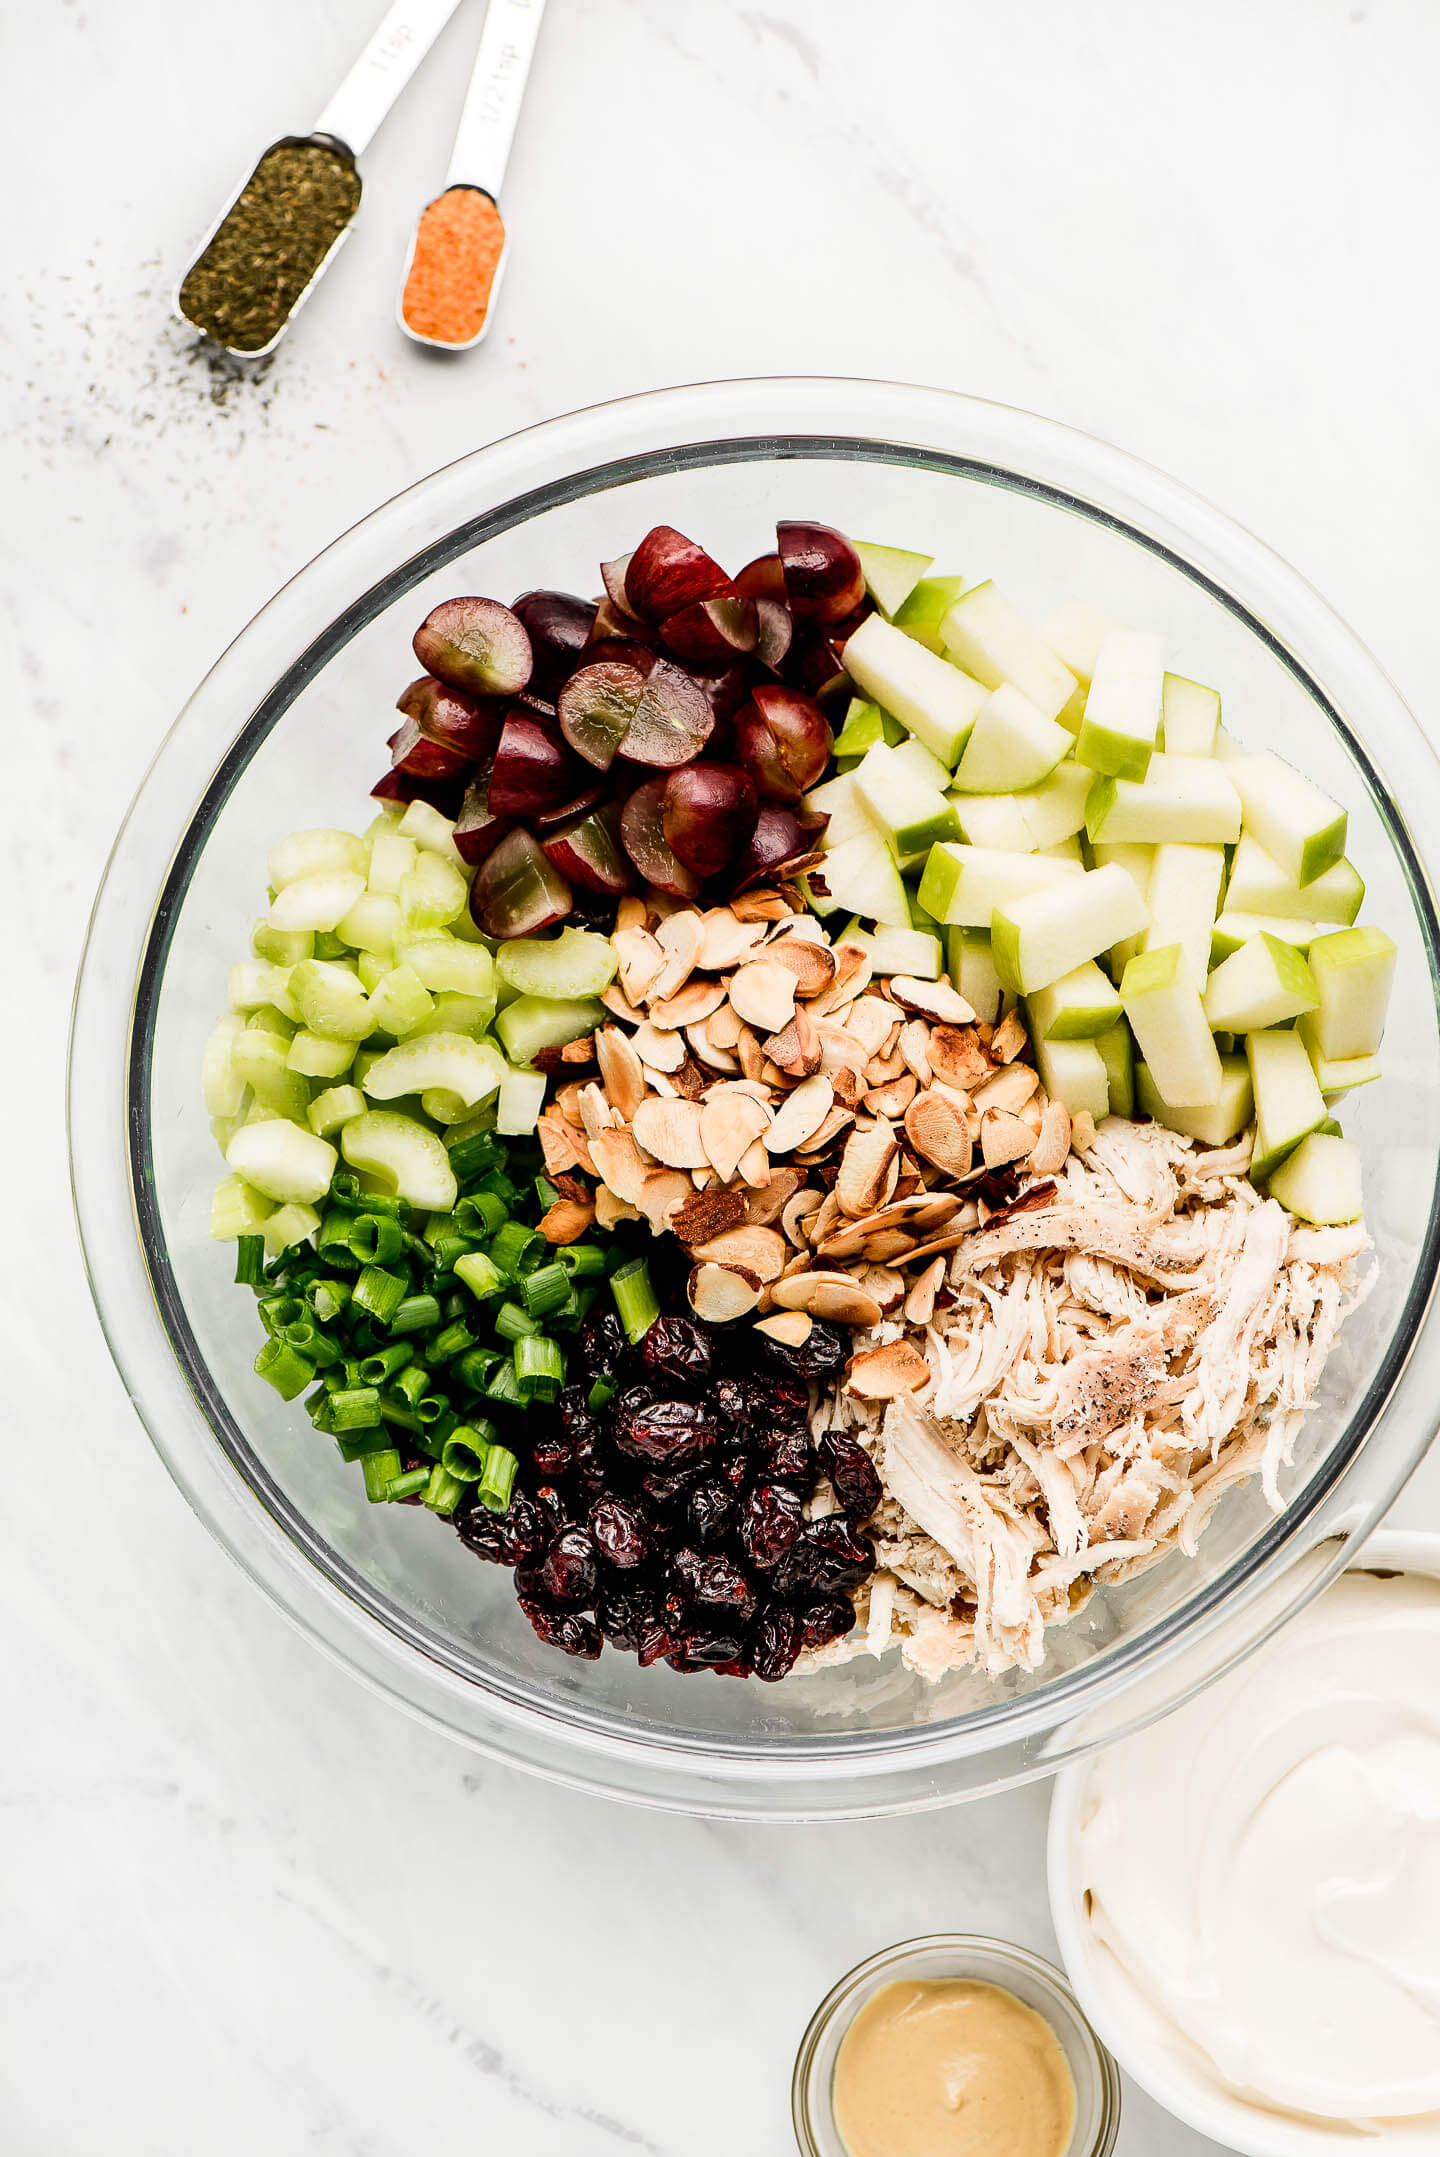 A bowl with piles of grapes, apples, shredded chicken, dried cranberries, green onions, celery, and sliced almonds.